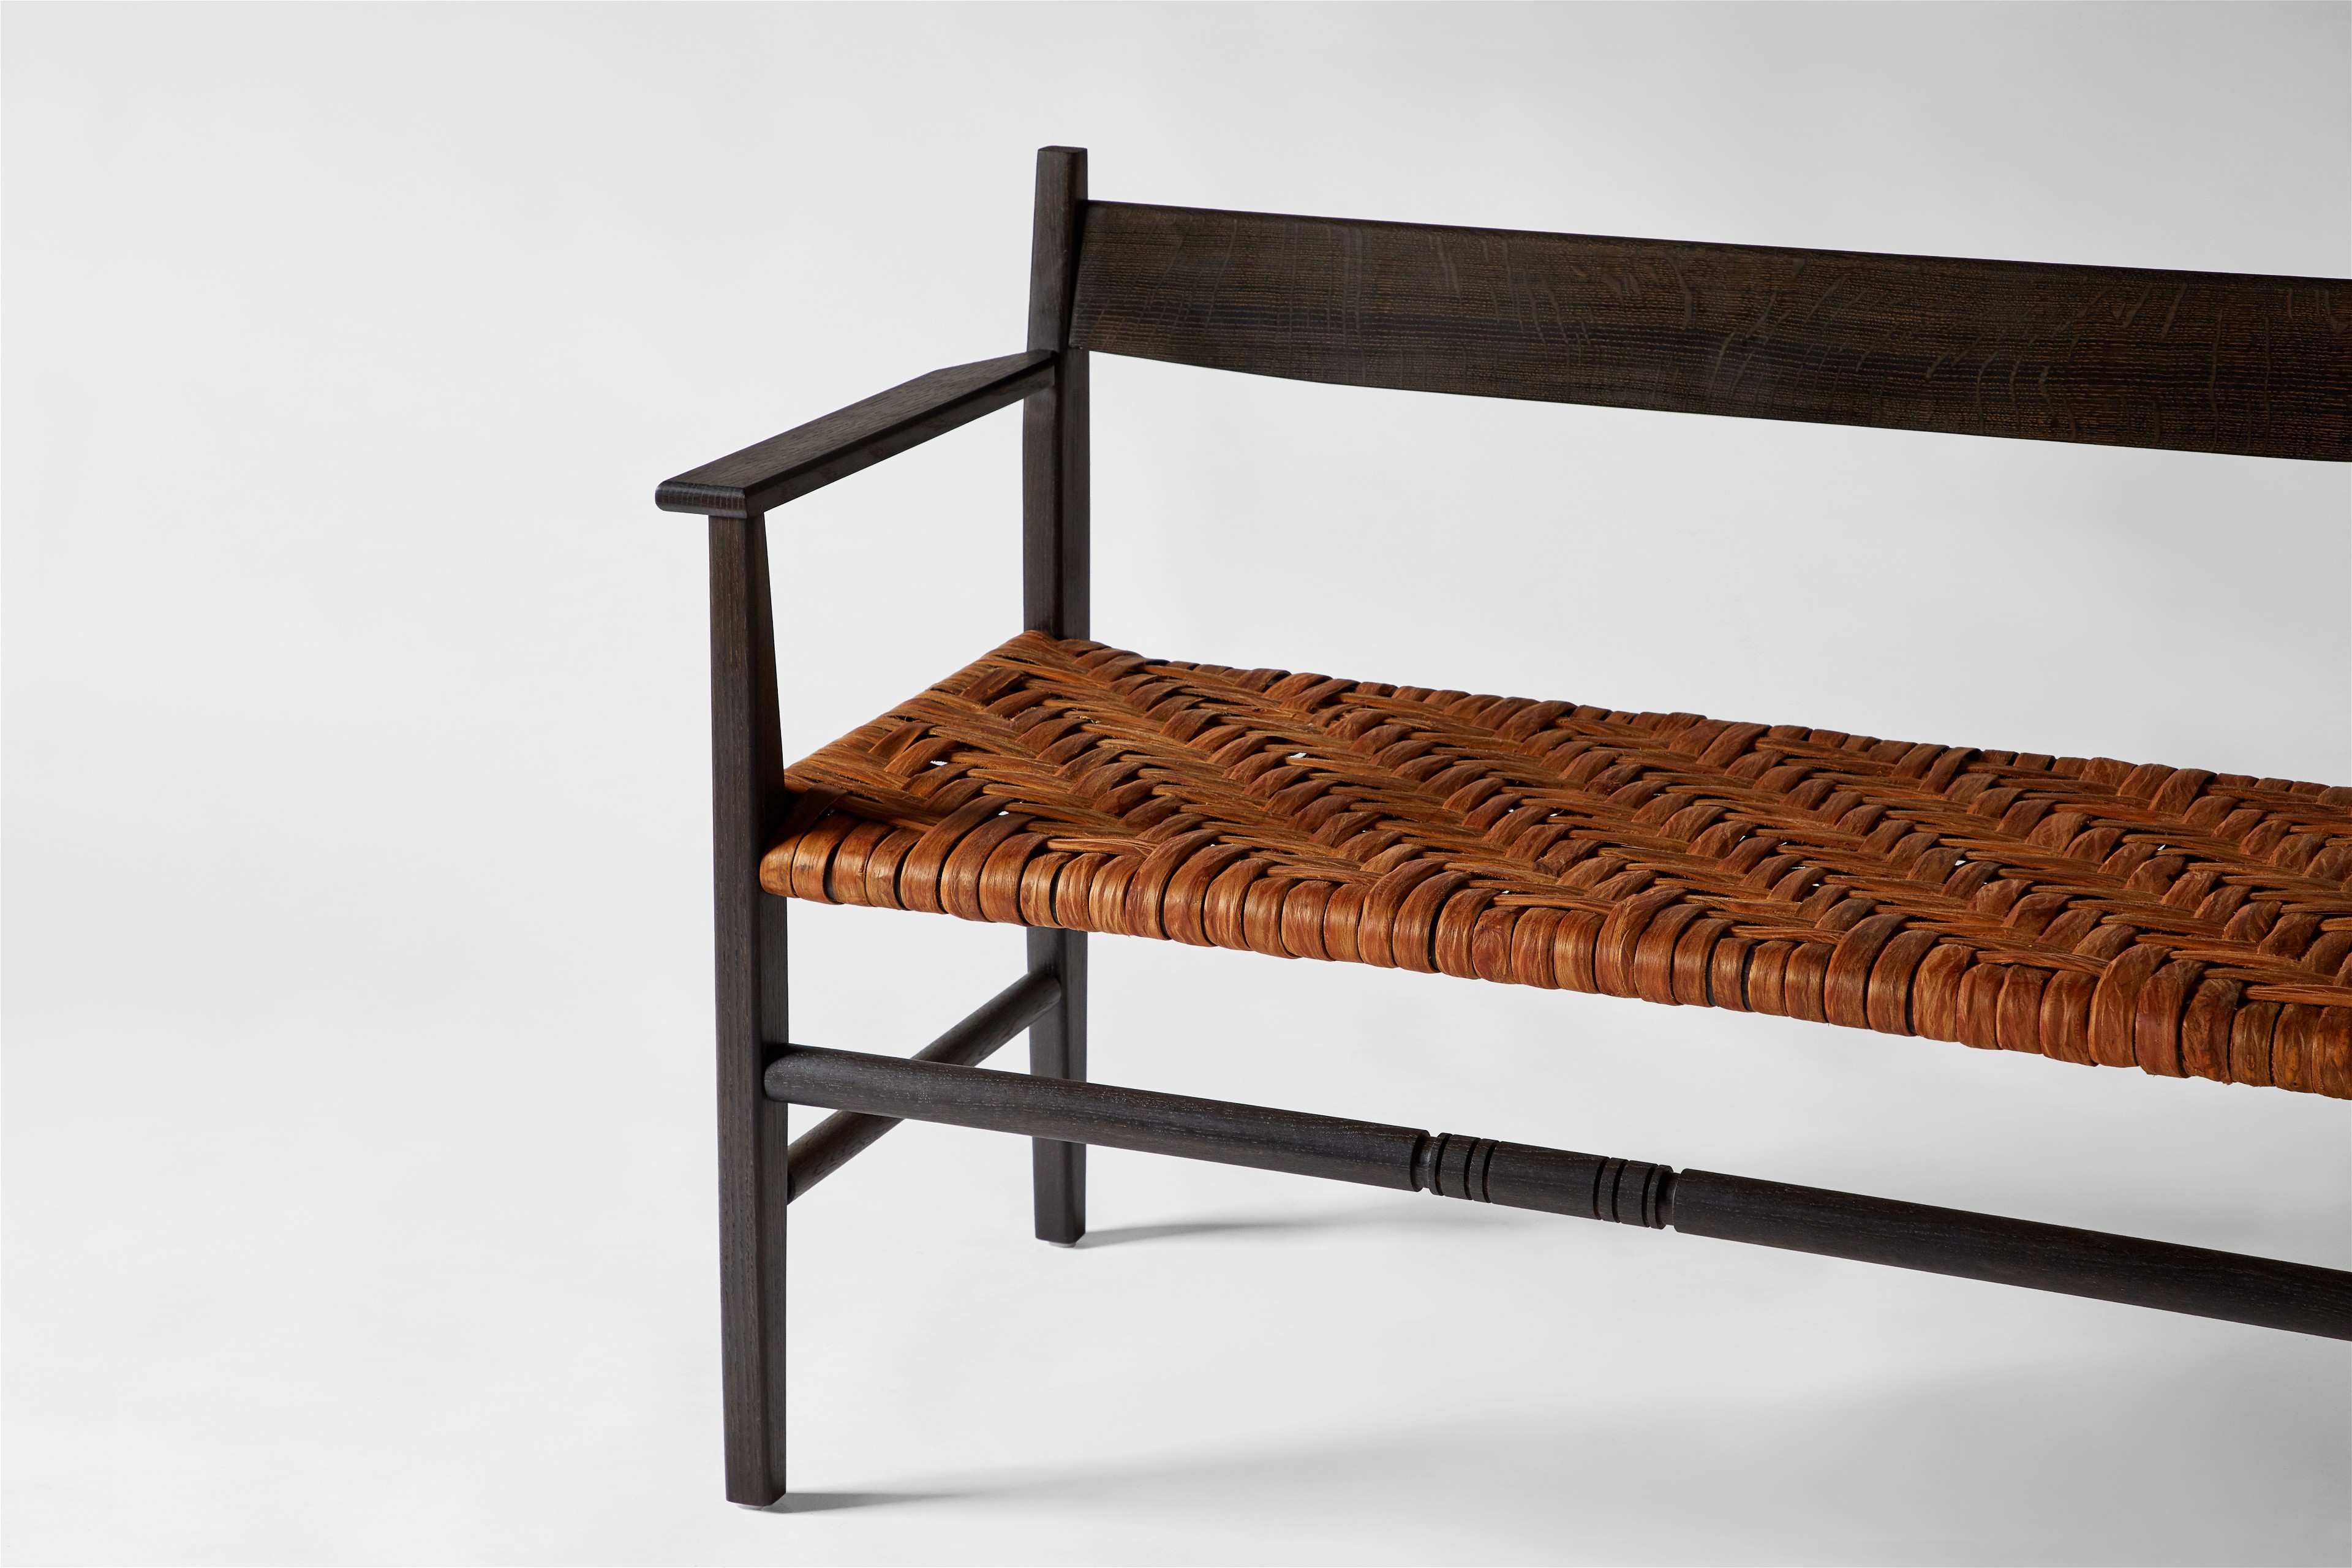 a wooden bench with a woven seat